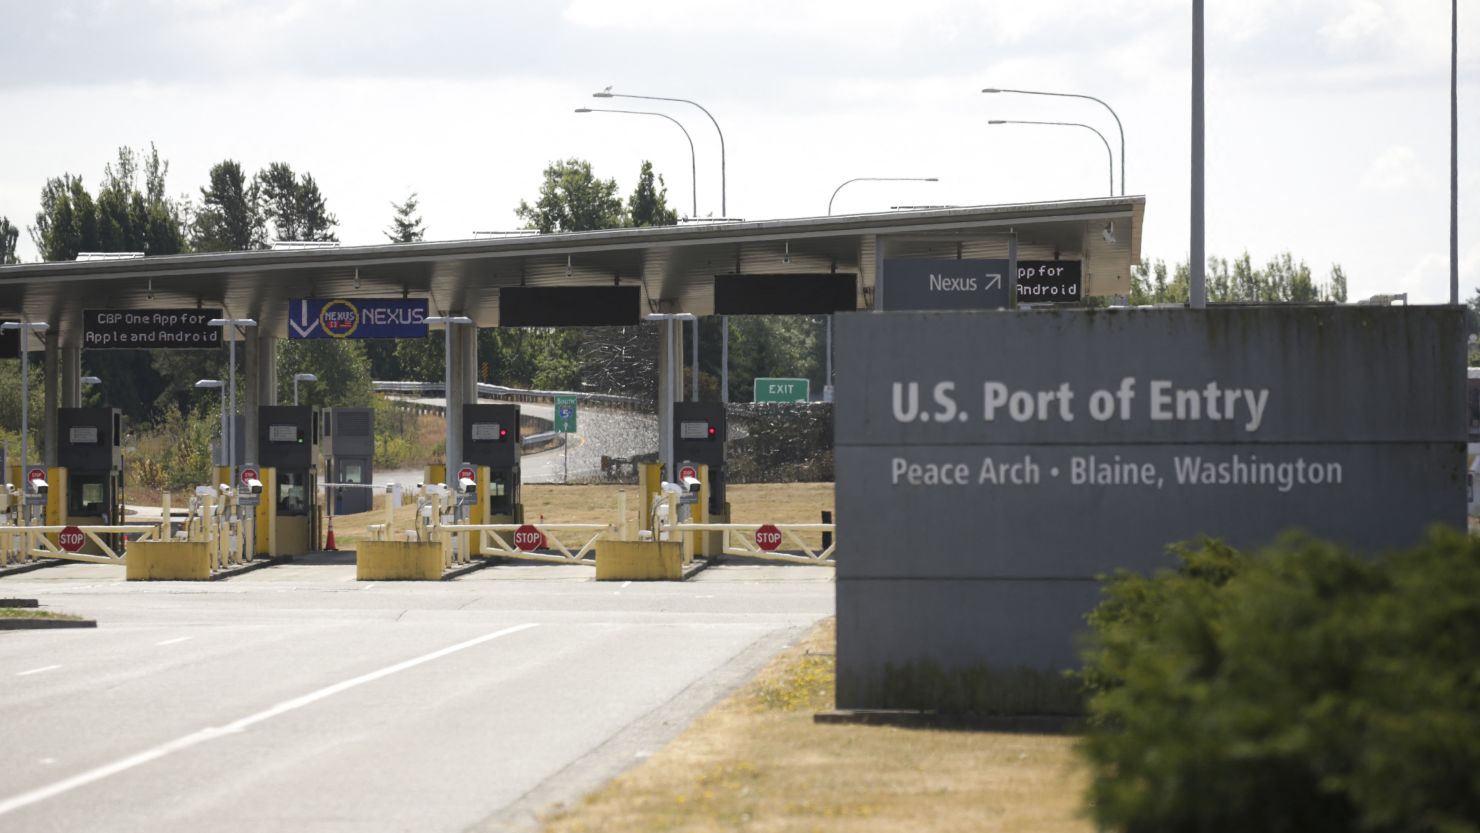 The US Port of Entry at the USA-Canada border, which is still closed to non-essential travel for Canadians, is pictured on the same day as Canada reopens to fully-vaccinated Americans for non-essential travel in Blaine, Washington on August 9, 2021. - American visitors trickled across the Canada-US border, cheering the reopening of the world's longest land boundary 17 months after all non-essential travel was halted to slow the spread of the novel coronavirus. Ottawa lifted quarantine requirements for US citizens and permanent residents arriving with proof of vaccination. (Photo by Jason Redmond / AFP) (Photo by JASON REDMOND/AFP via Getty Images)